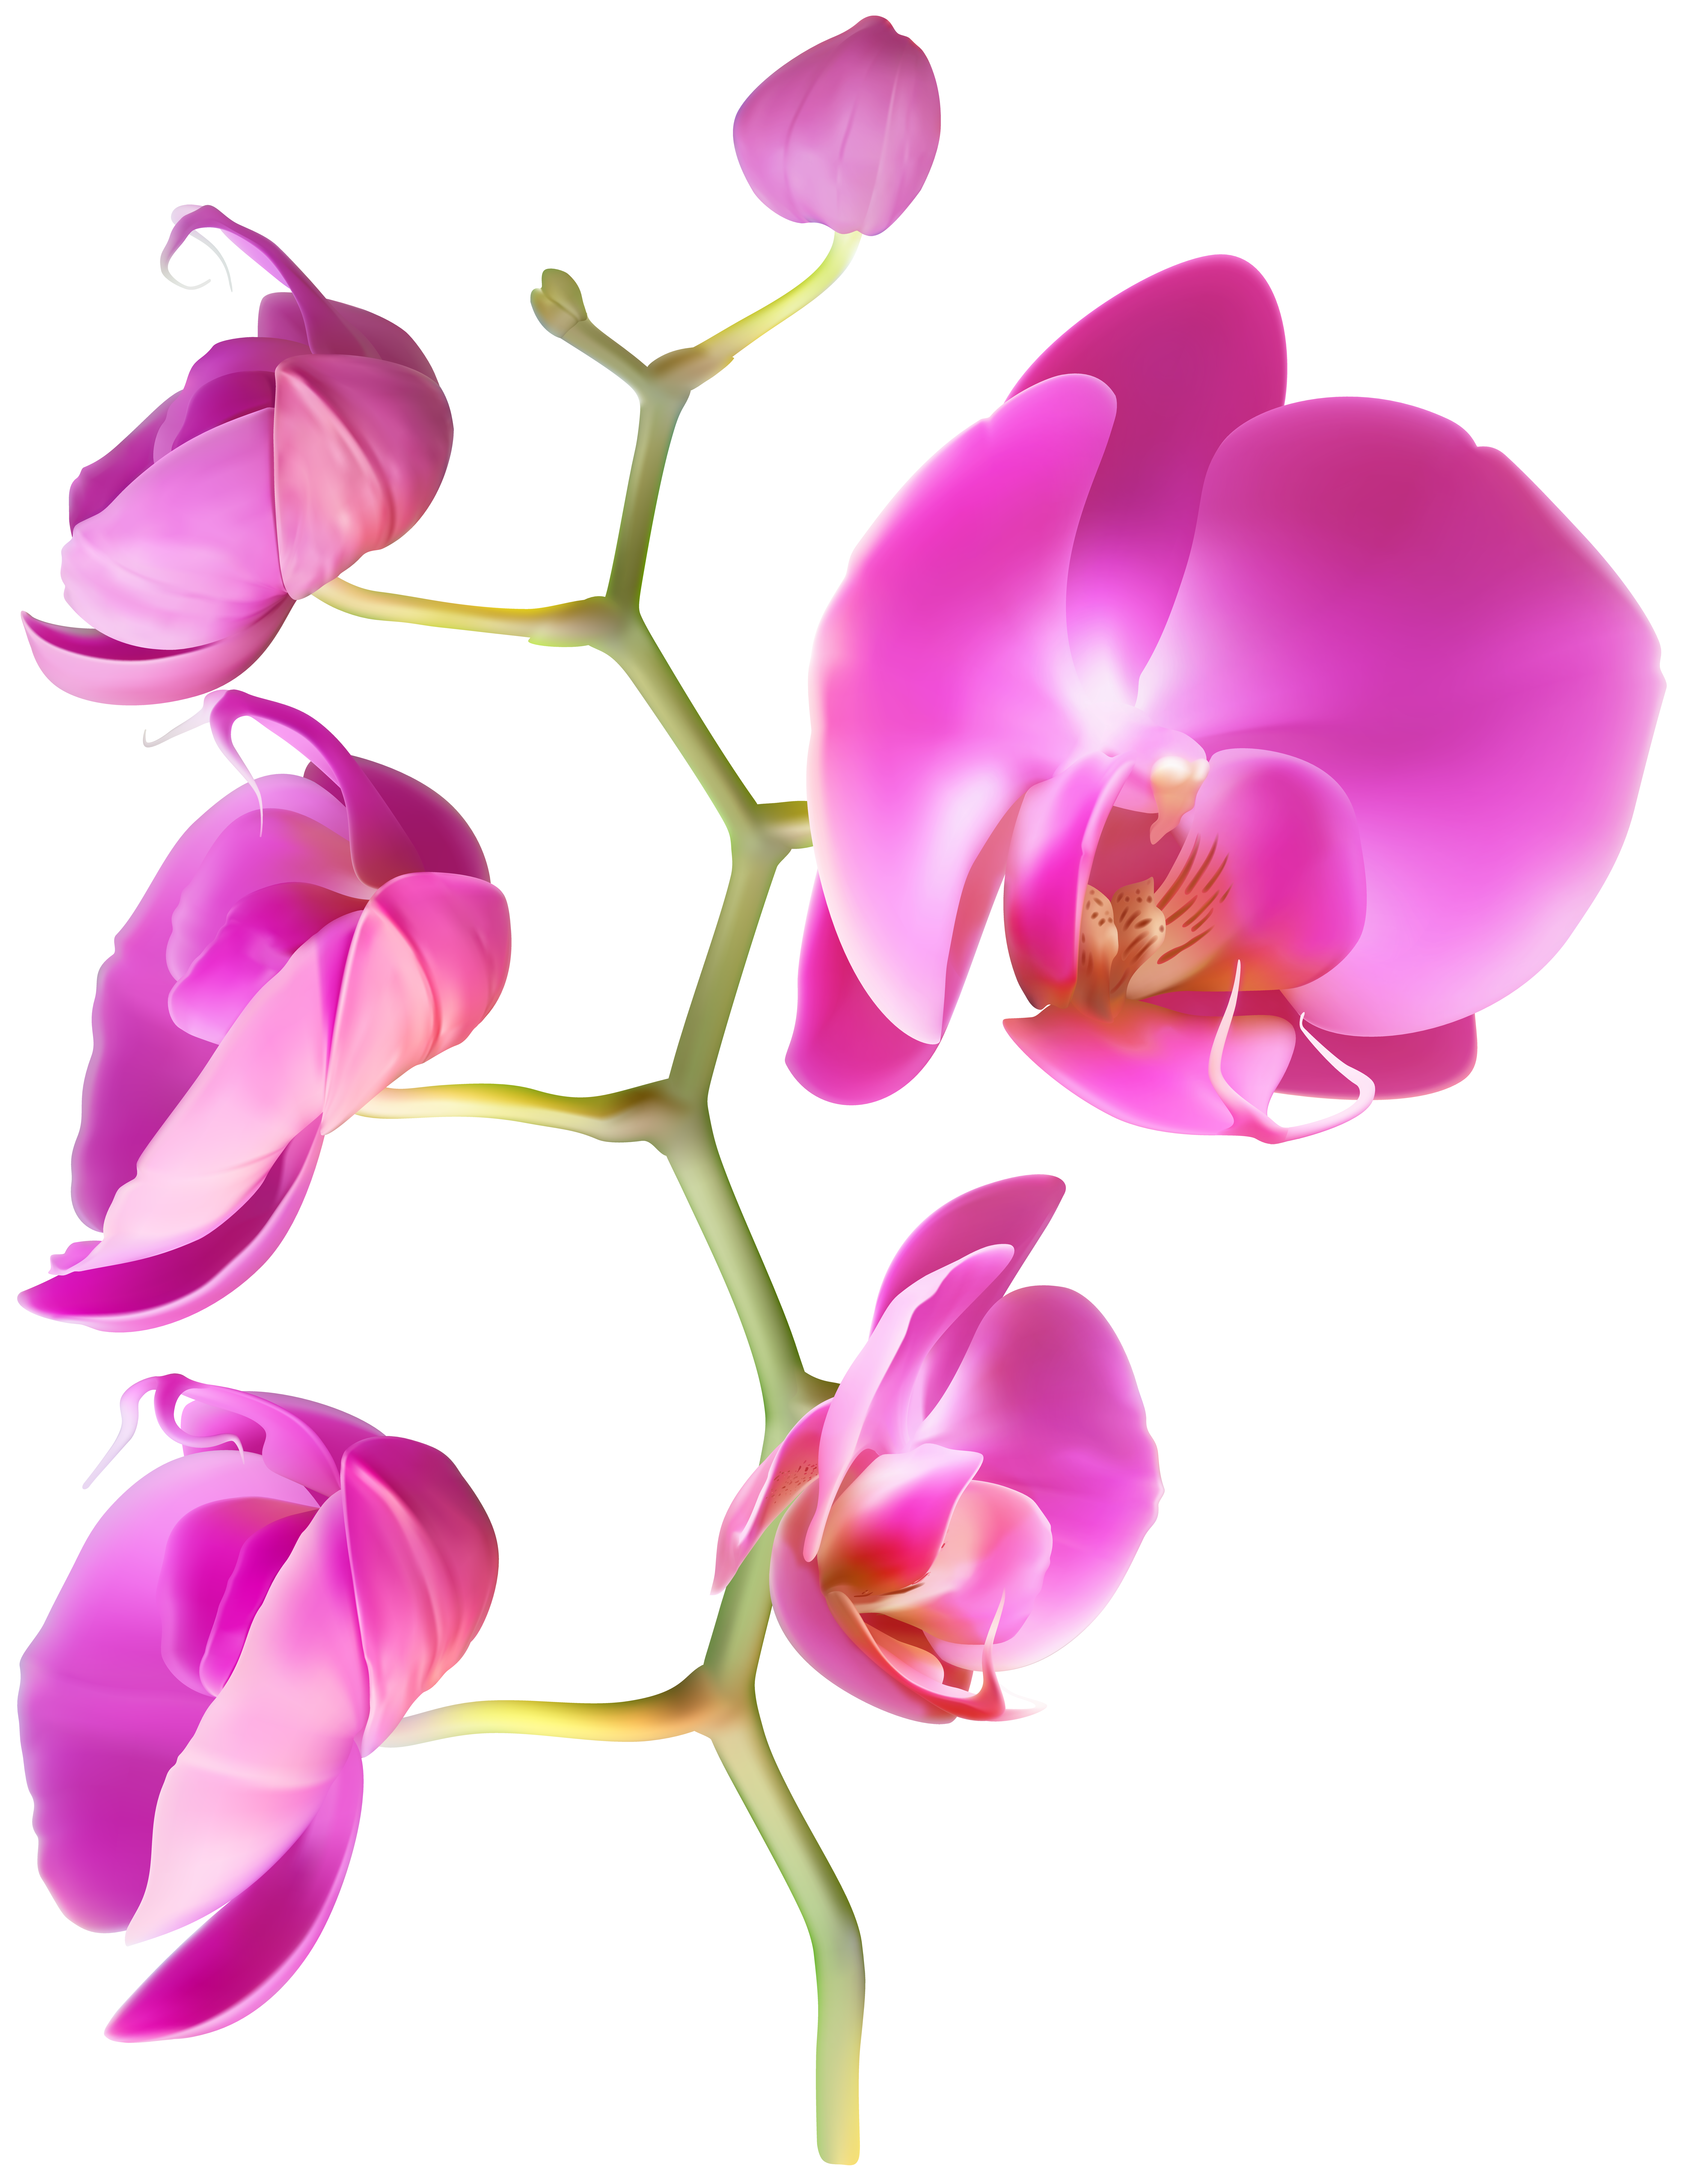 orchid clipart high resolution